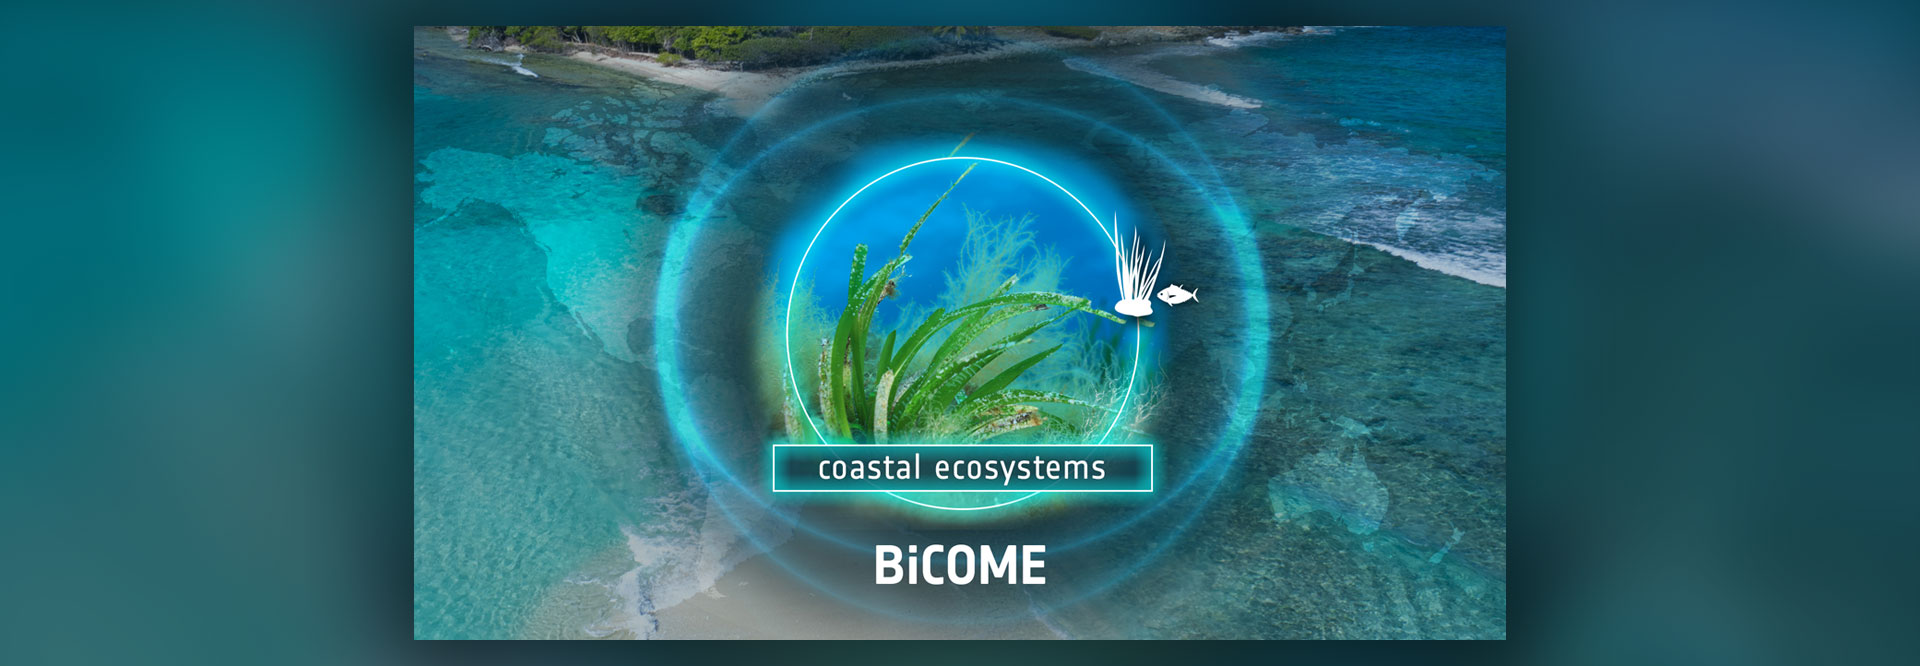 Visual created from icon of a fish and seaweed and seagrass photo in the middle